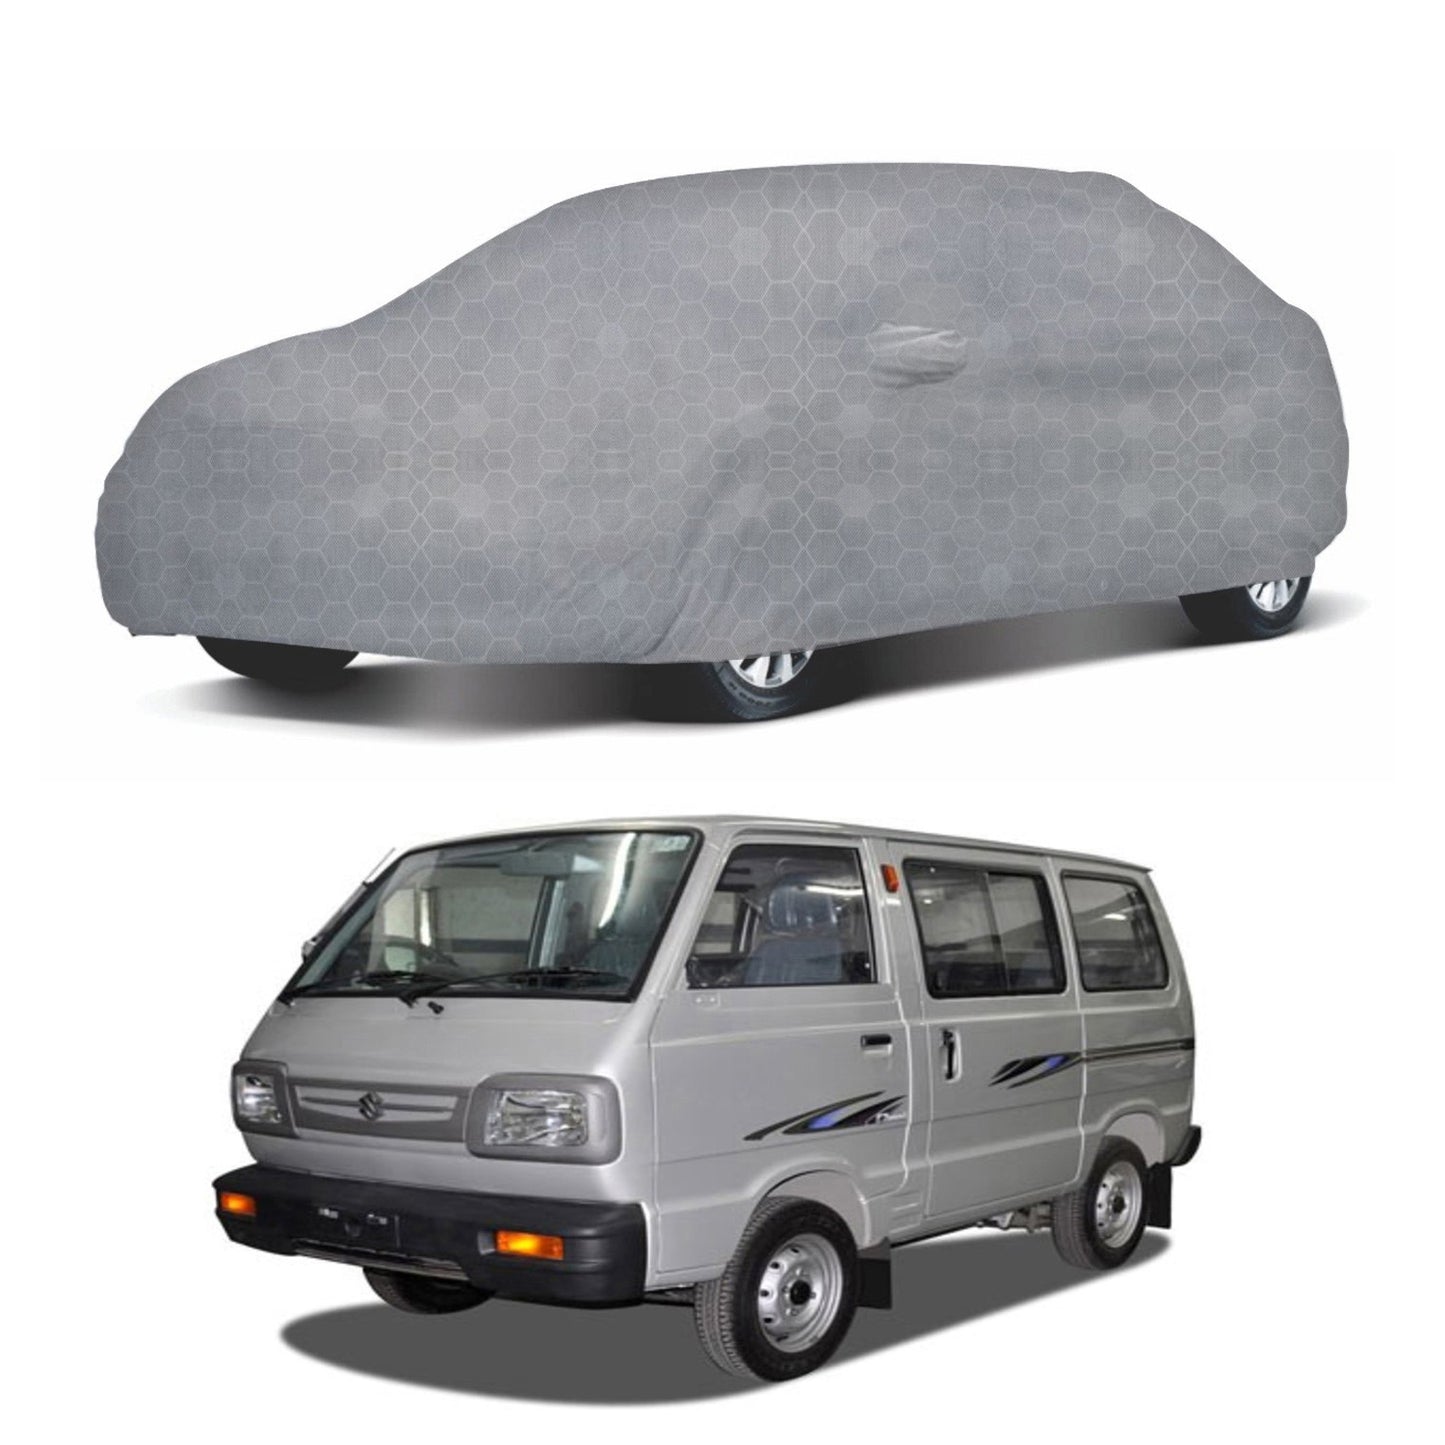 Oshotto 100% Dust Proof, Water Resistant Grey Car Body Cover with Mirror Pocket For Maruti Suzuki Omni